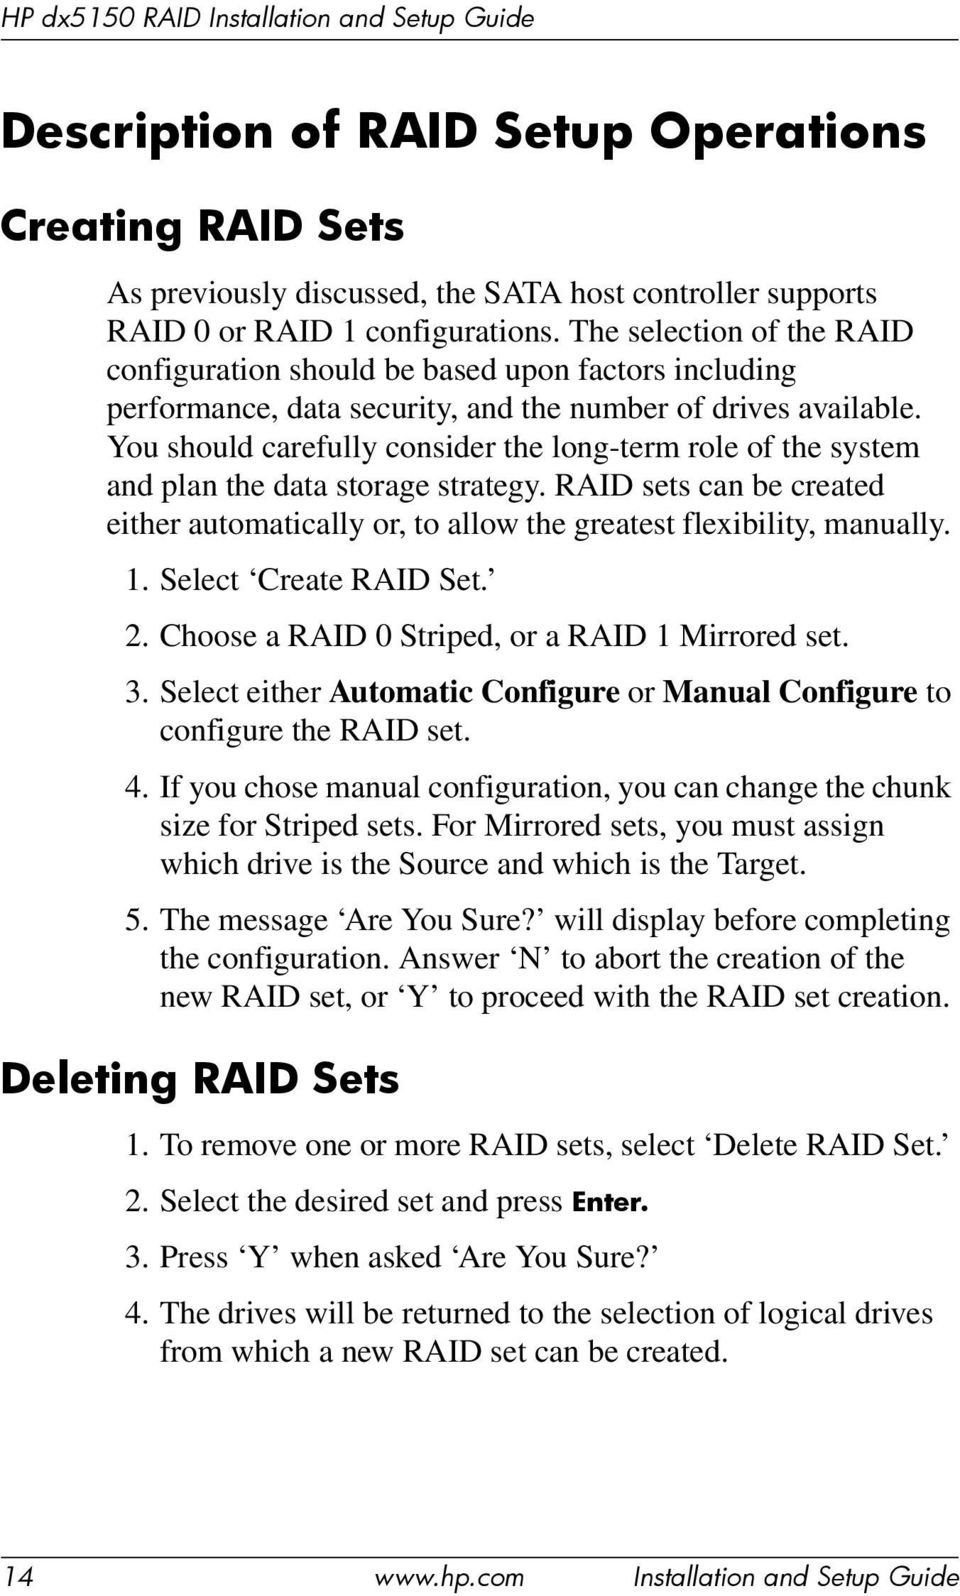 You should carefully consider the long-term role of the system and plan the data storage strategy. RAID sets can be created either automatically or, to allow the greatest flexibility, manually. 1.